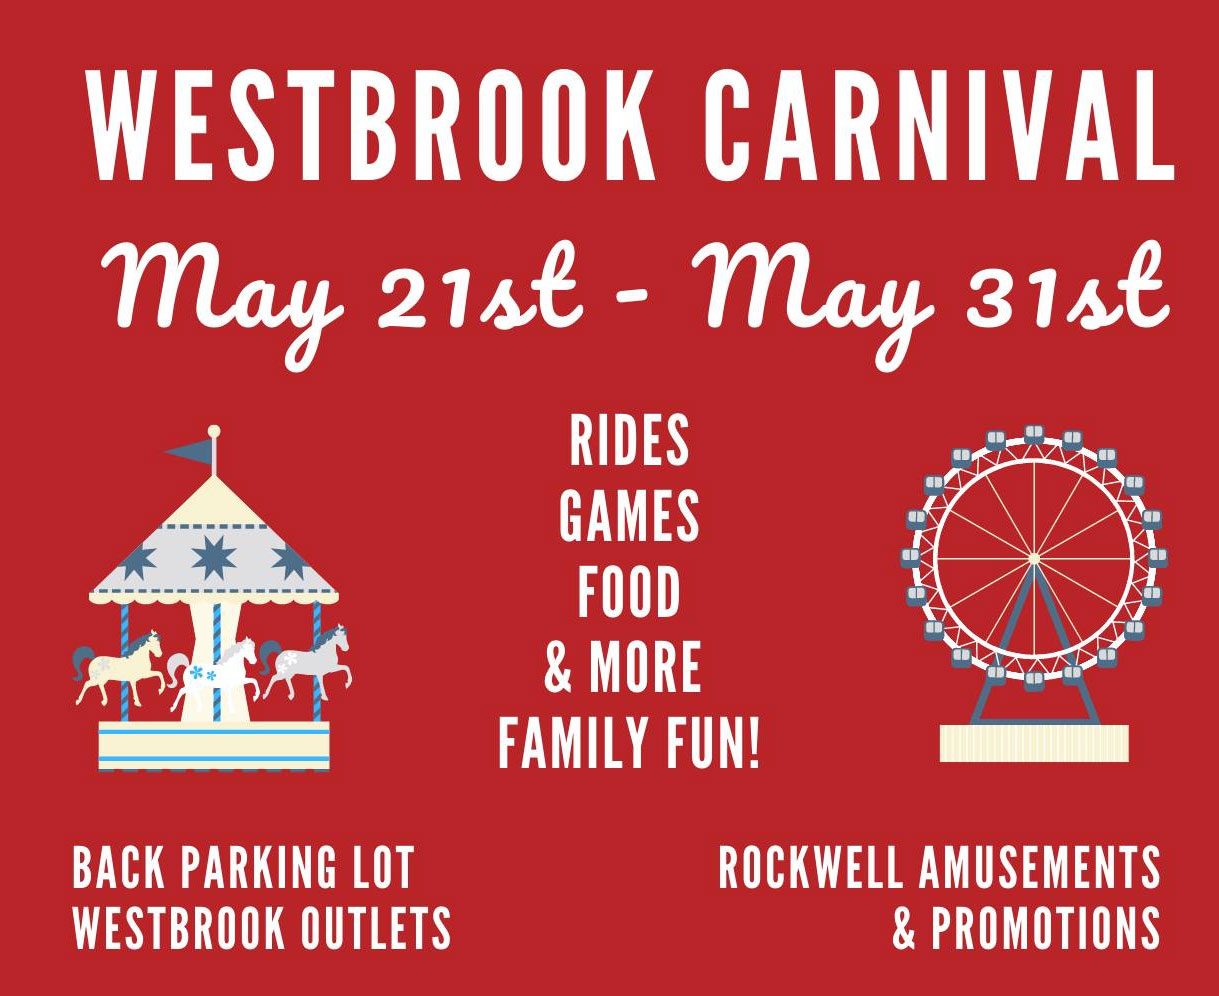 Westbrook Carnival at Westbrook Outlets